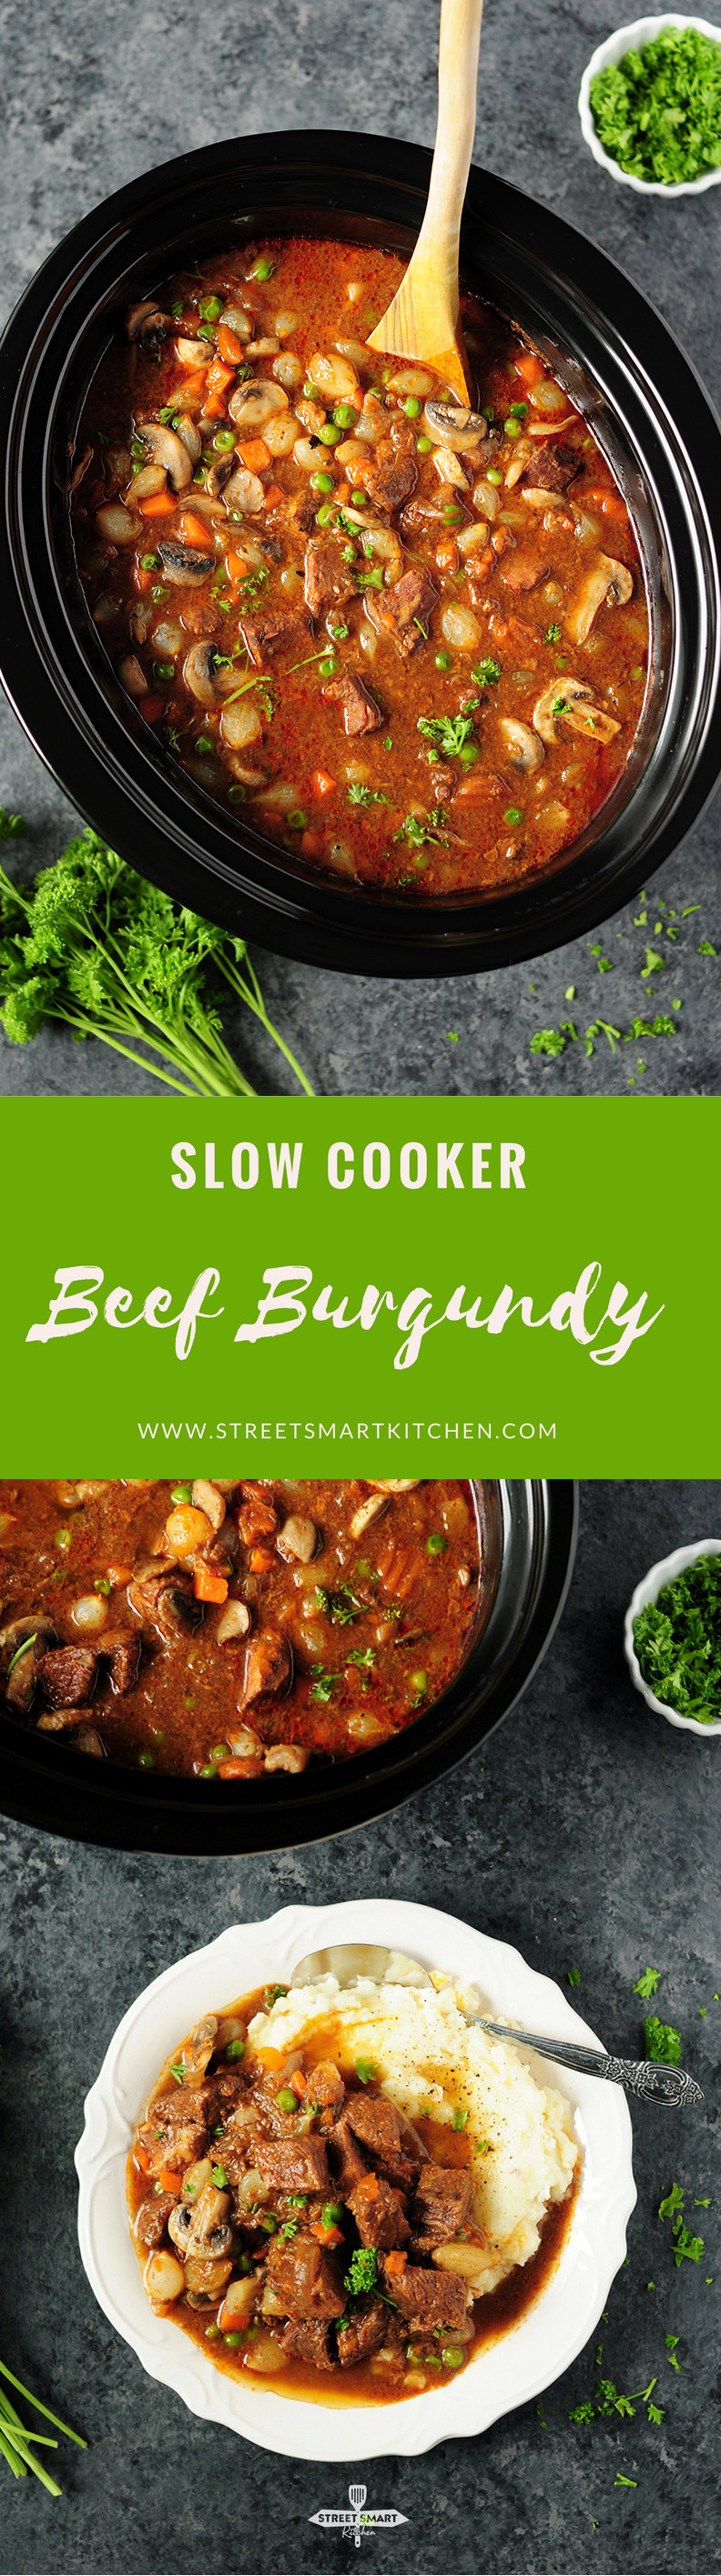 For a weeknight meal, this savory and scrumptious beef burgundy can be easily put together in a slow cooker to simplify the process!